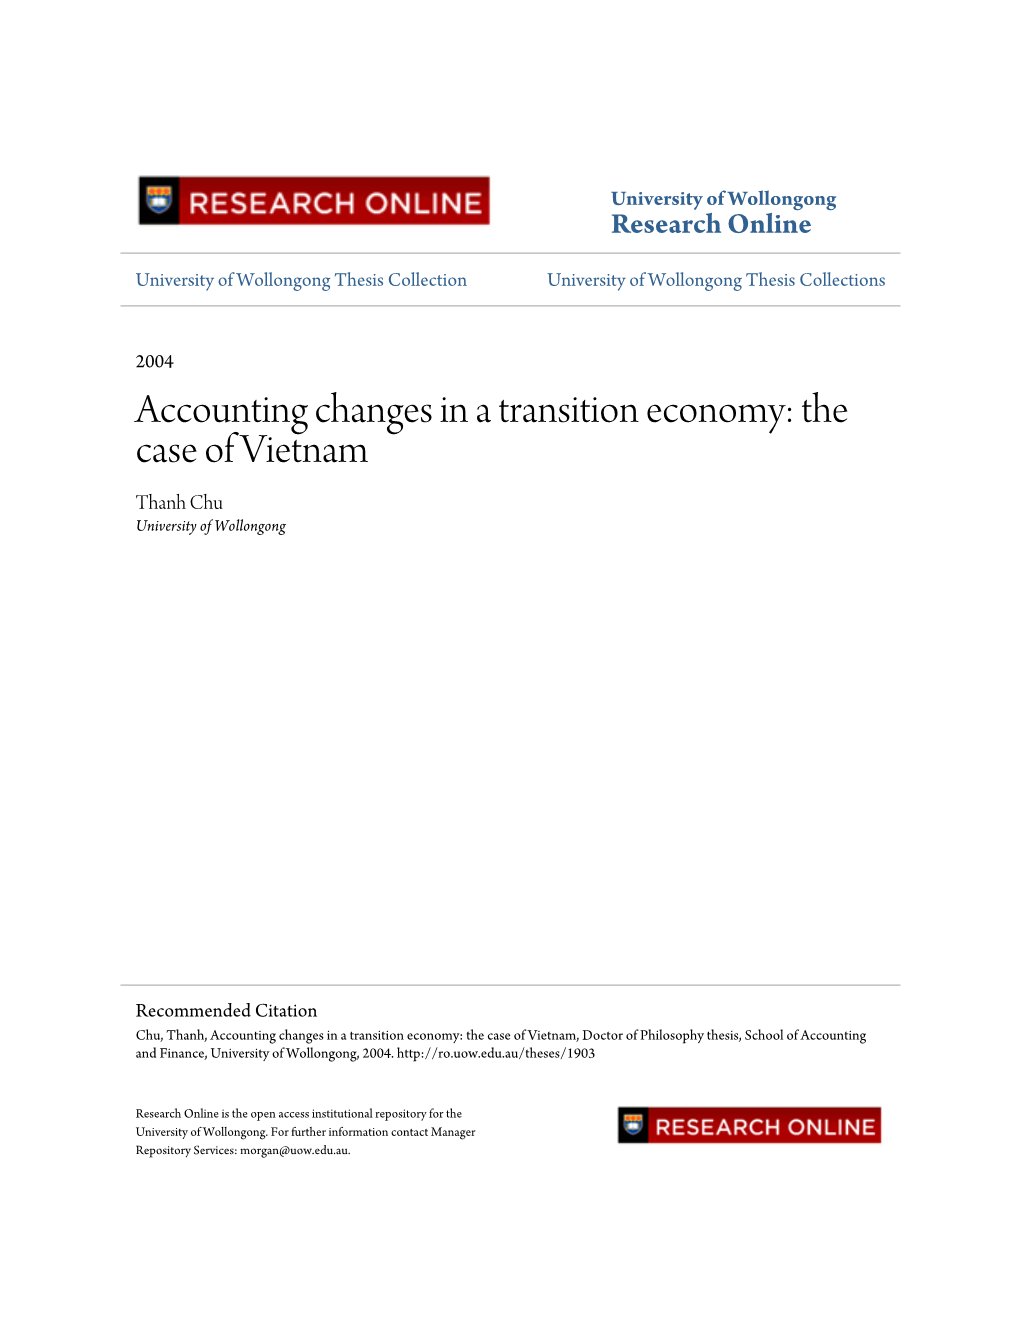 Accounting Changes in a Transition Economy: the Case of Vietnam Thanh Chu University of Wollongong